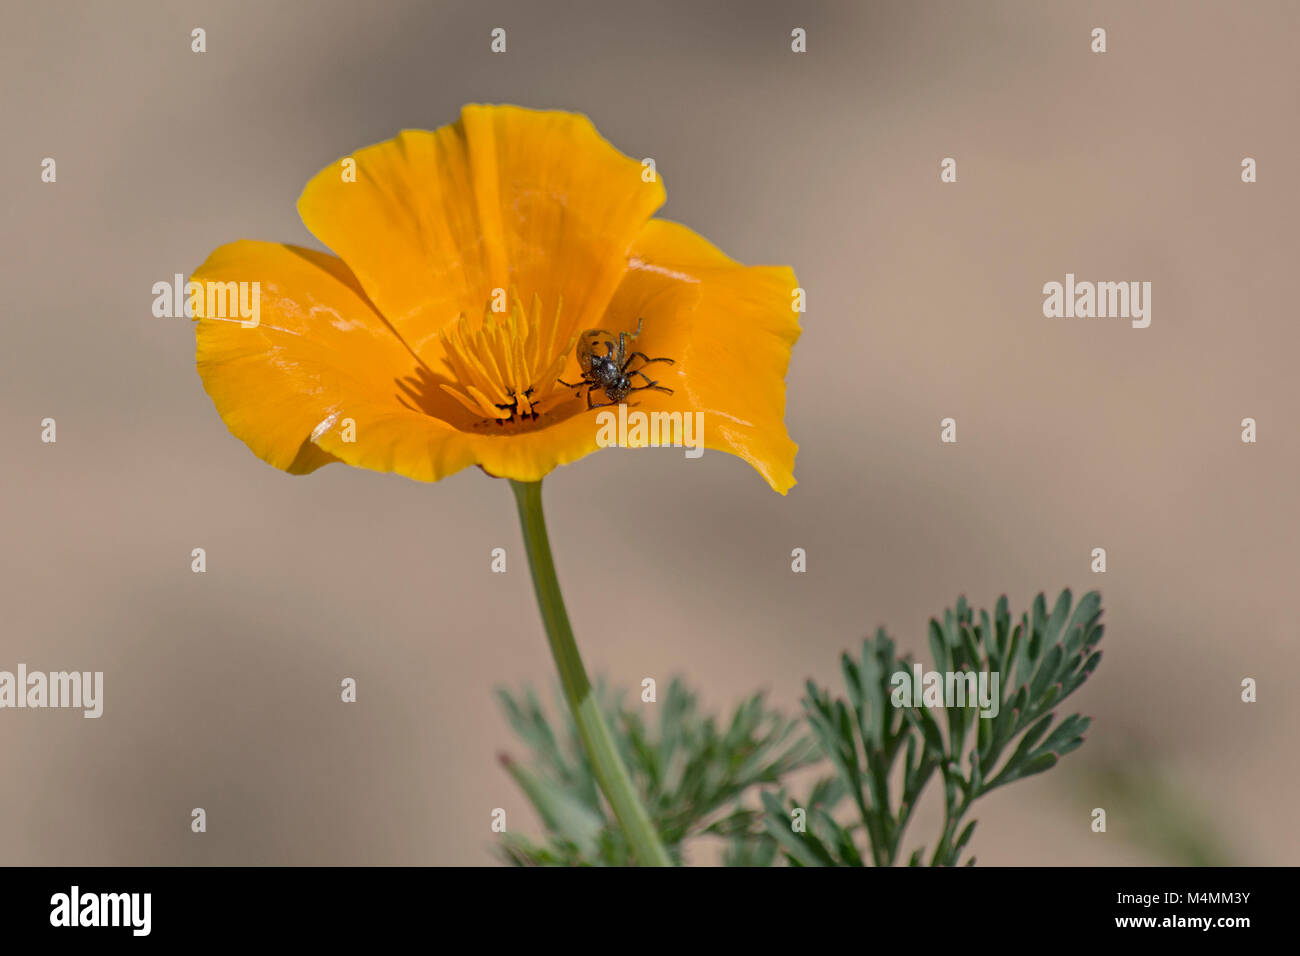 macro of a spotted beetle on a golden california poppy flower and leaves on a blurred beige and grey background Stock Photo